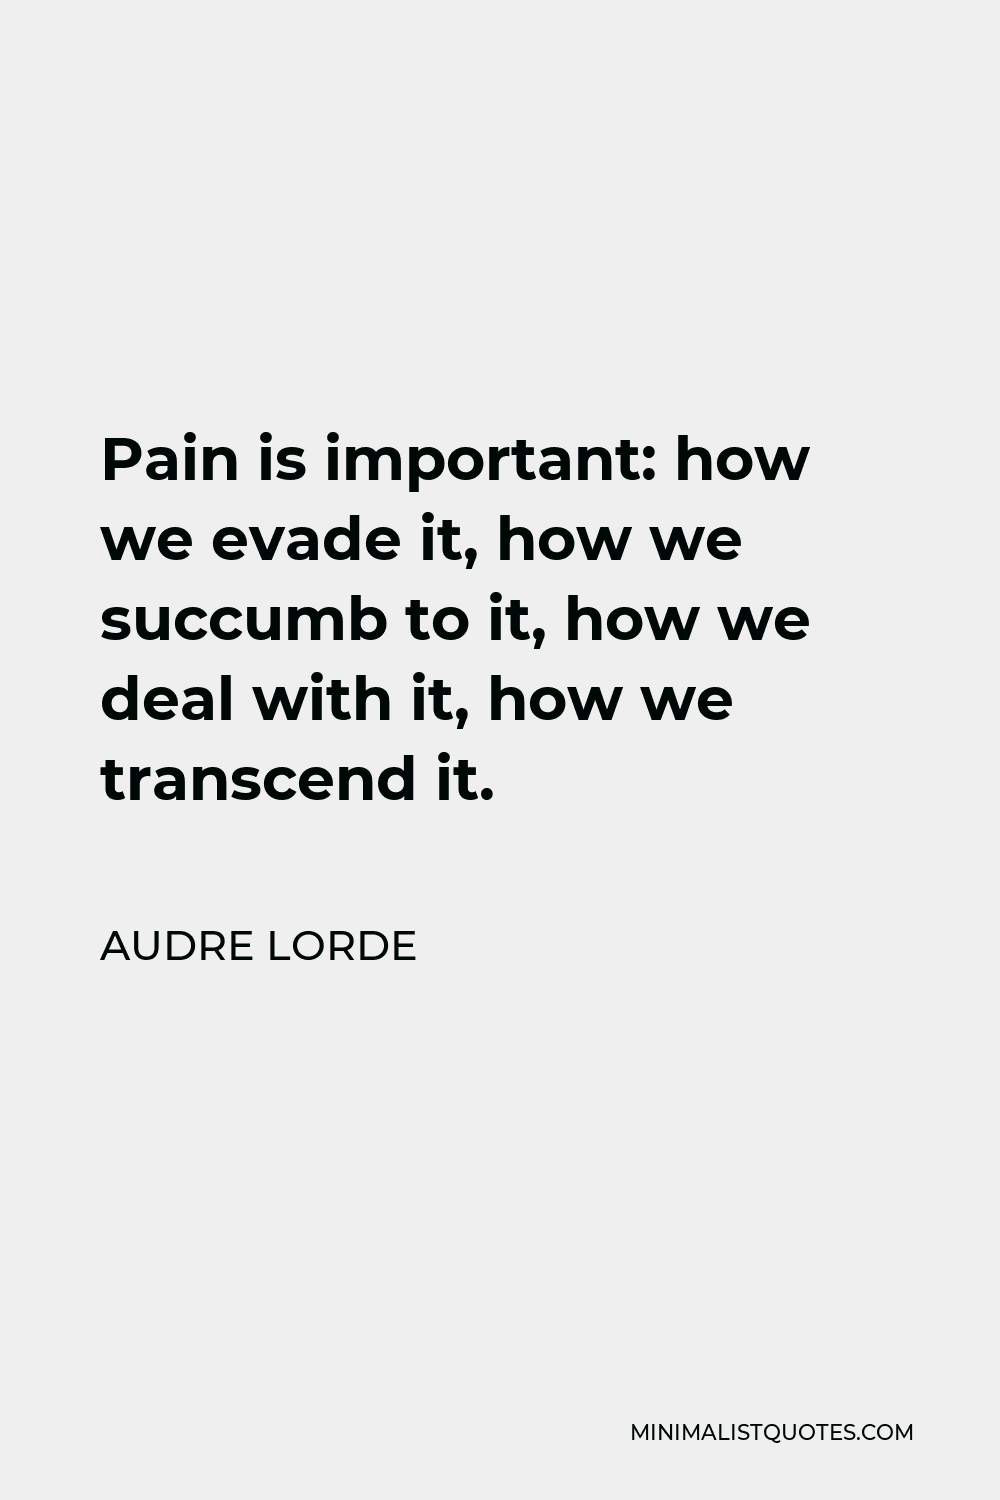 Audre Lorde Quote - Pain is important: how we evade it, how we succumb to it, how we deal with it, how we transcend it.